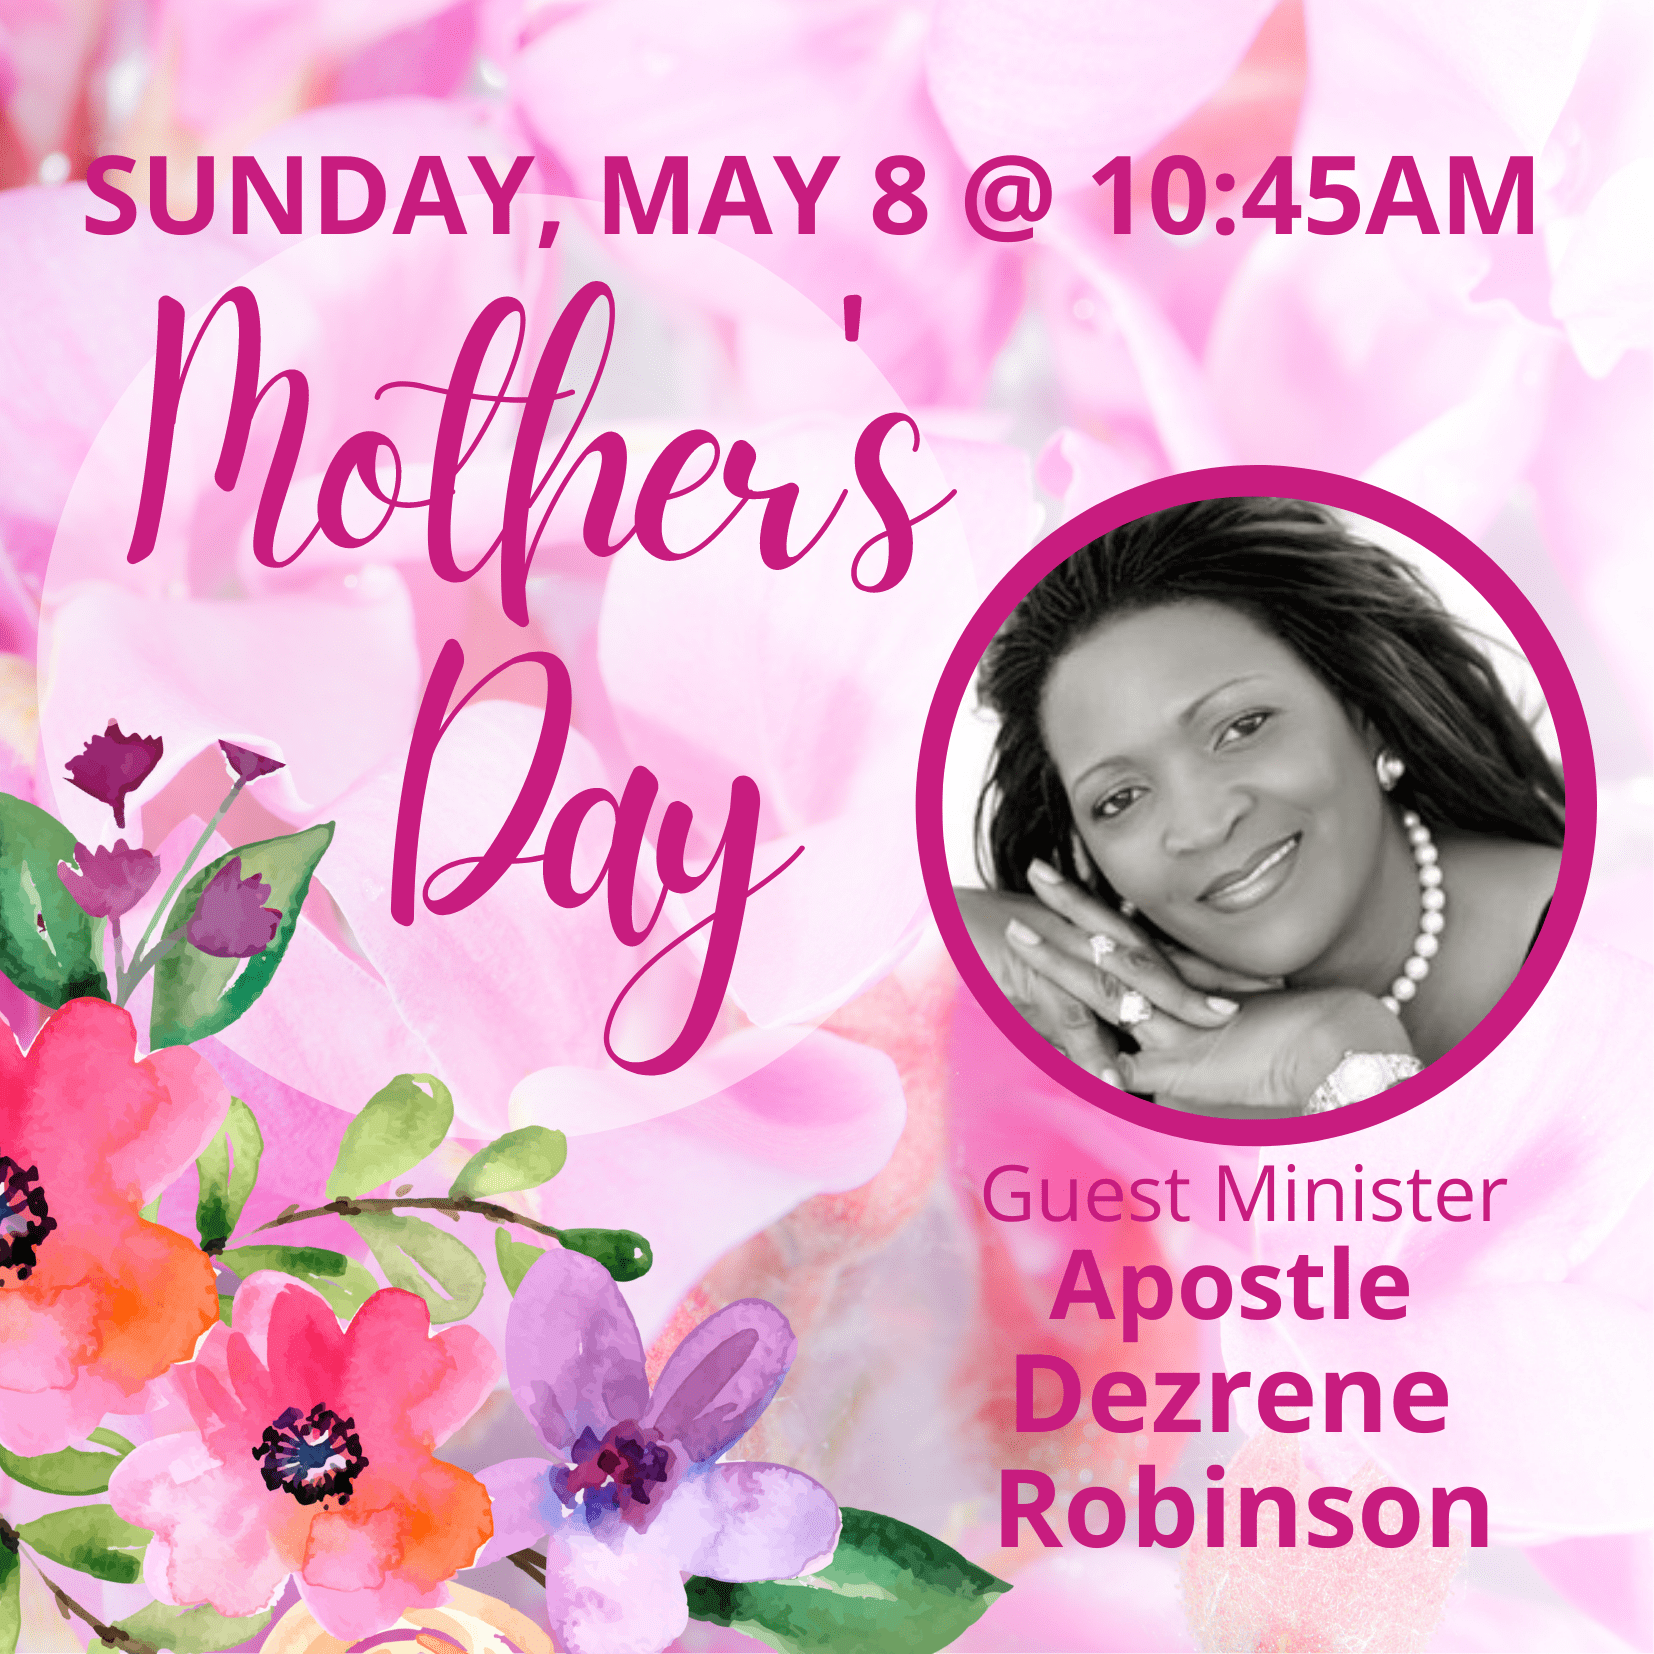 MOTHERS DAY SERVICE WITH GUEST MINISTER APOSTLE DEZRENE ROBINSON